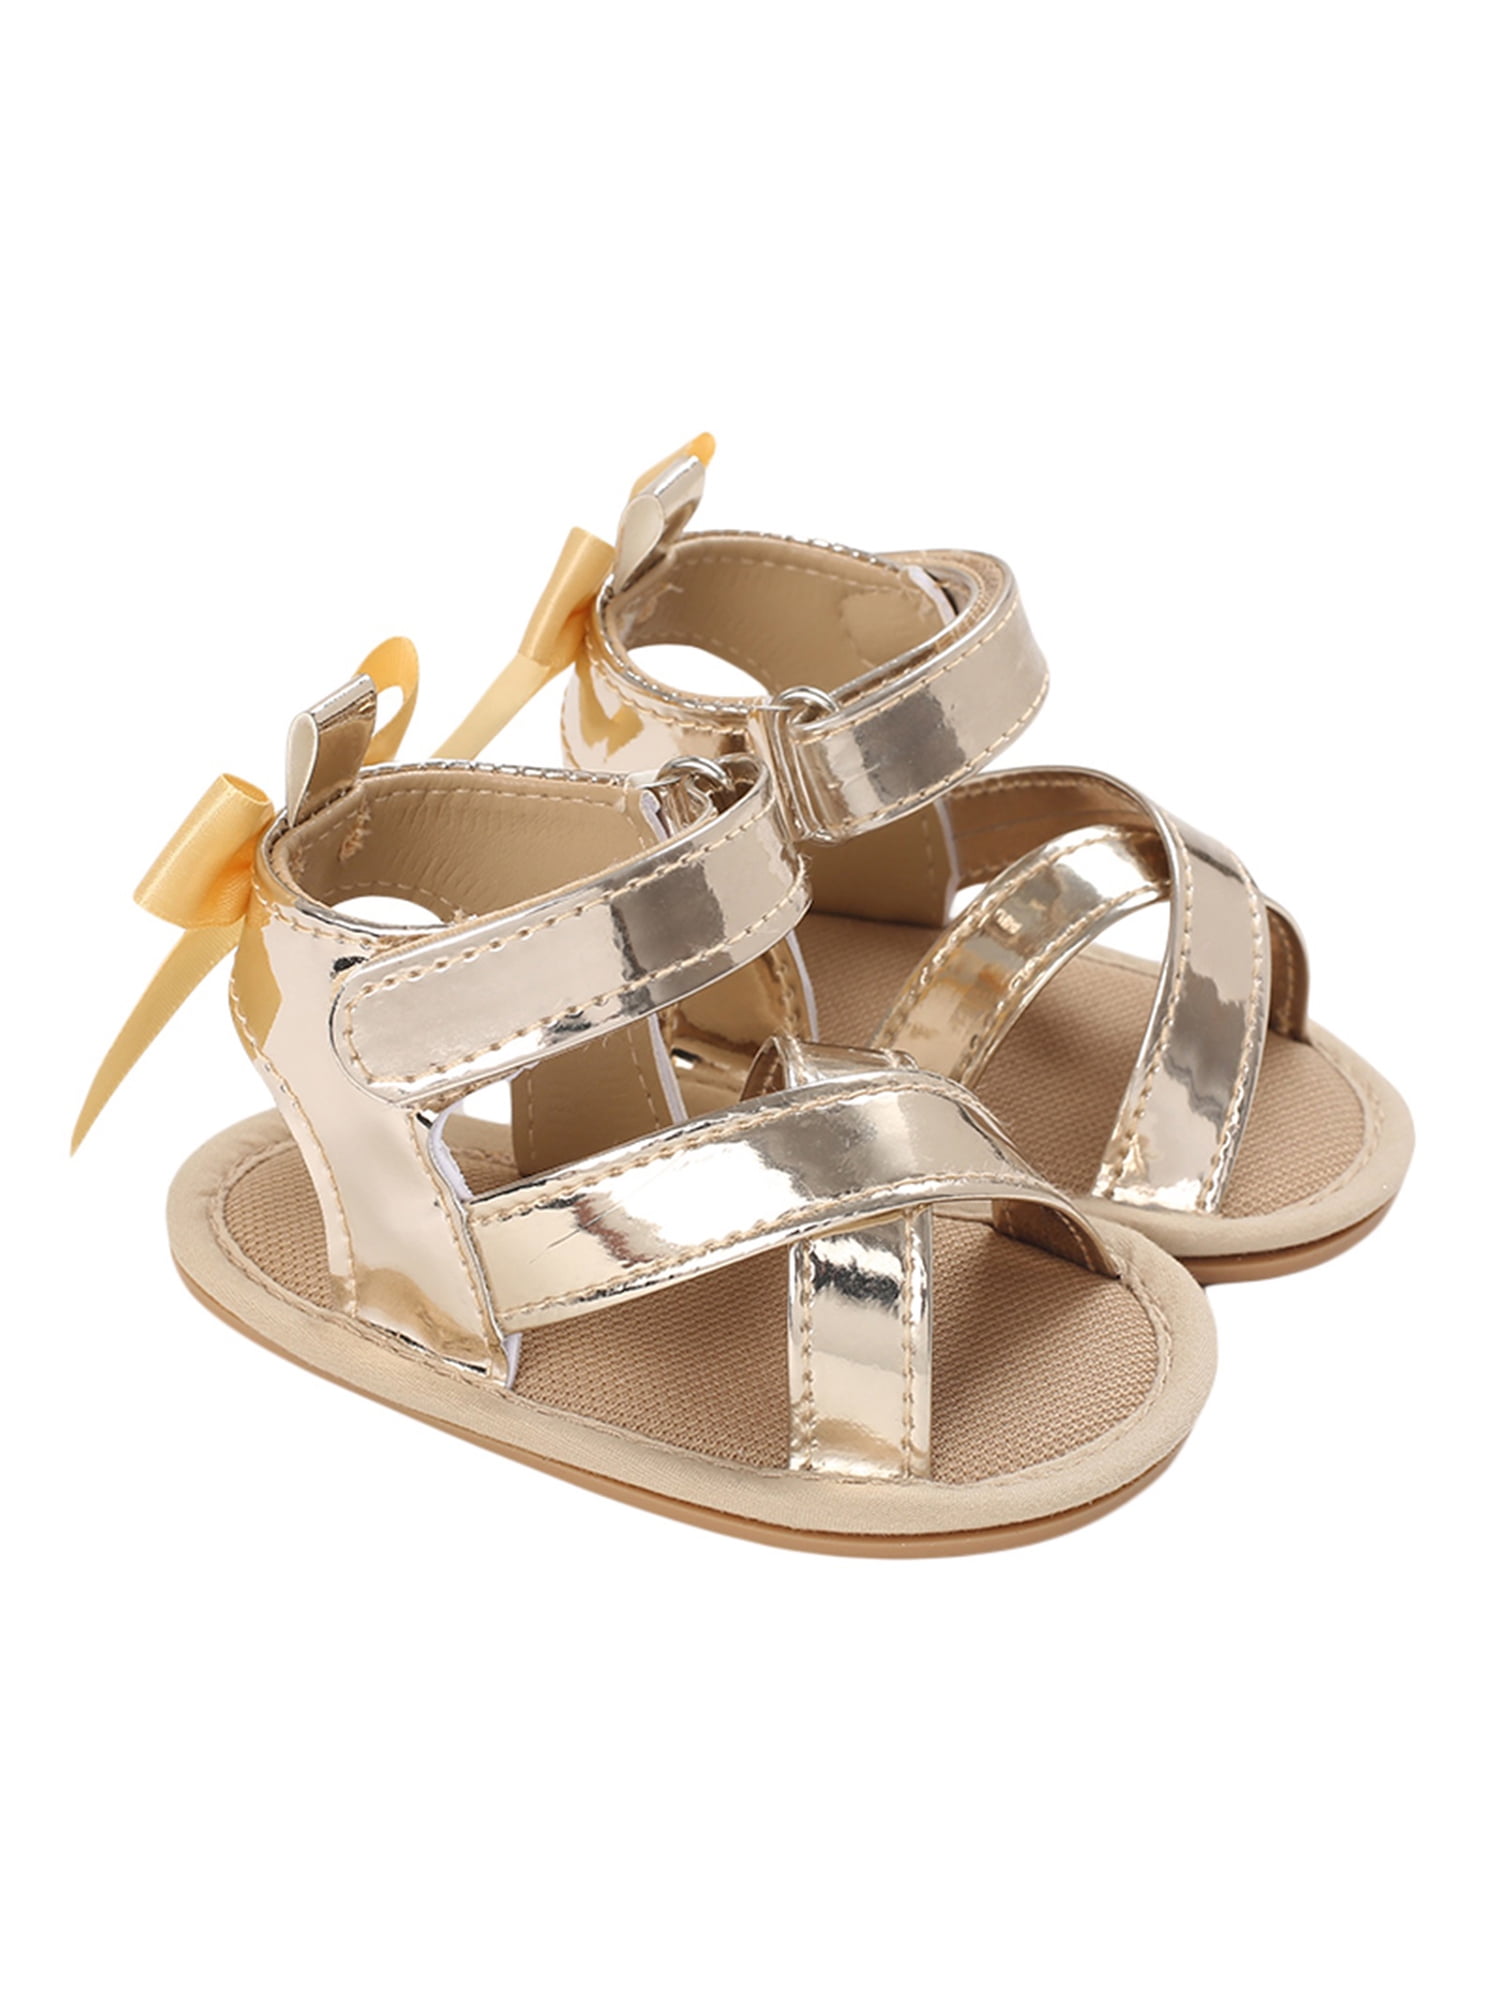 Infant Baby Girls T Strap Thong Flat Sandals PU Leather Bow Ankle Flat Shoes Toddler Girl Beach Flip Flops by Lowprofile 